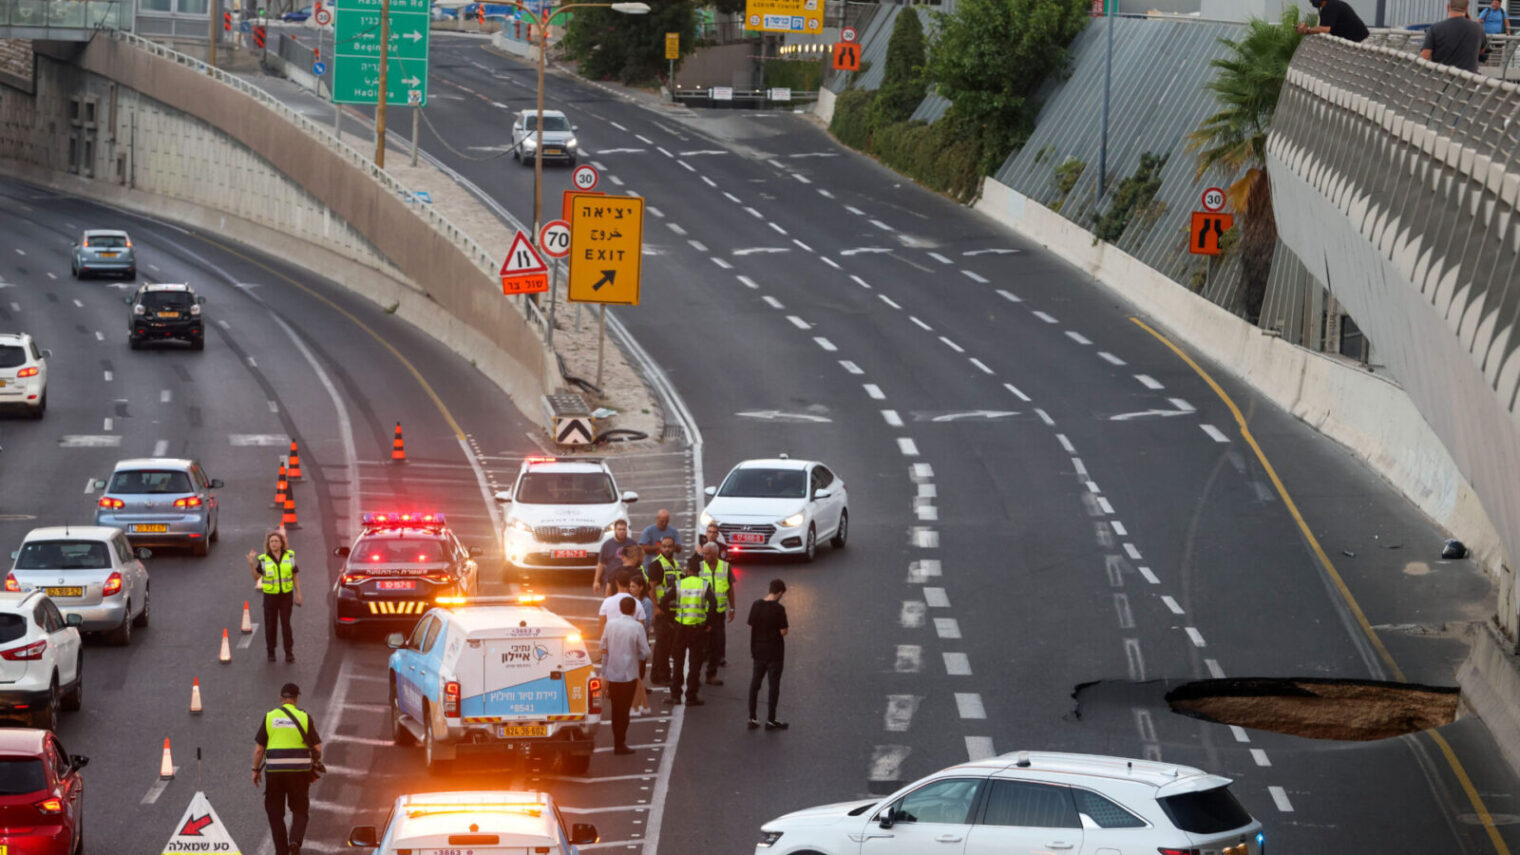 Rescue and police forces at the site of a sinkhole in the Ayalon highway in Tel Aviv, September 17, 2022. Photo by Avshalom Sassoni/FLASH90